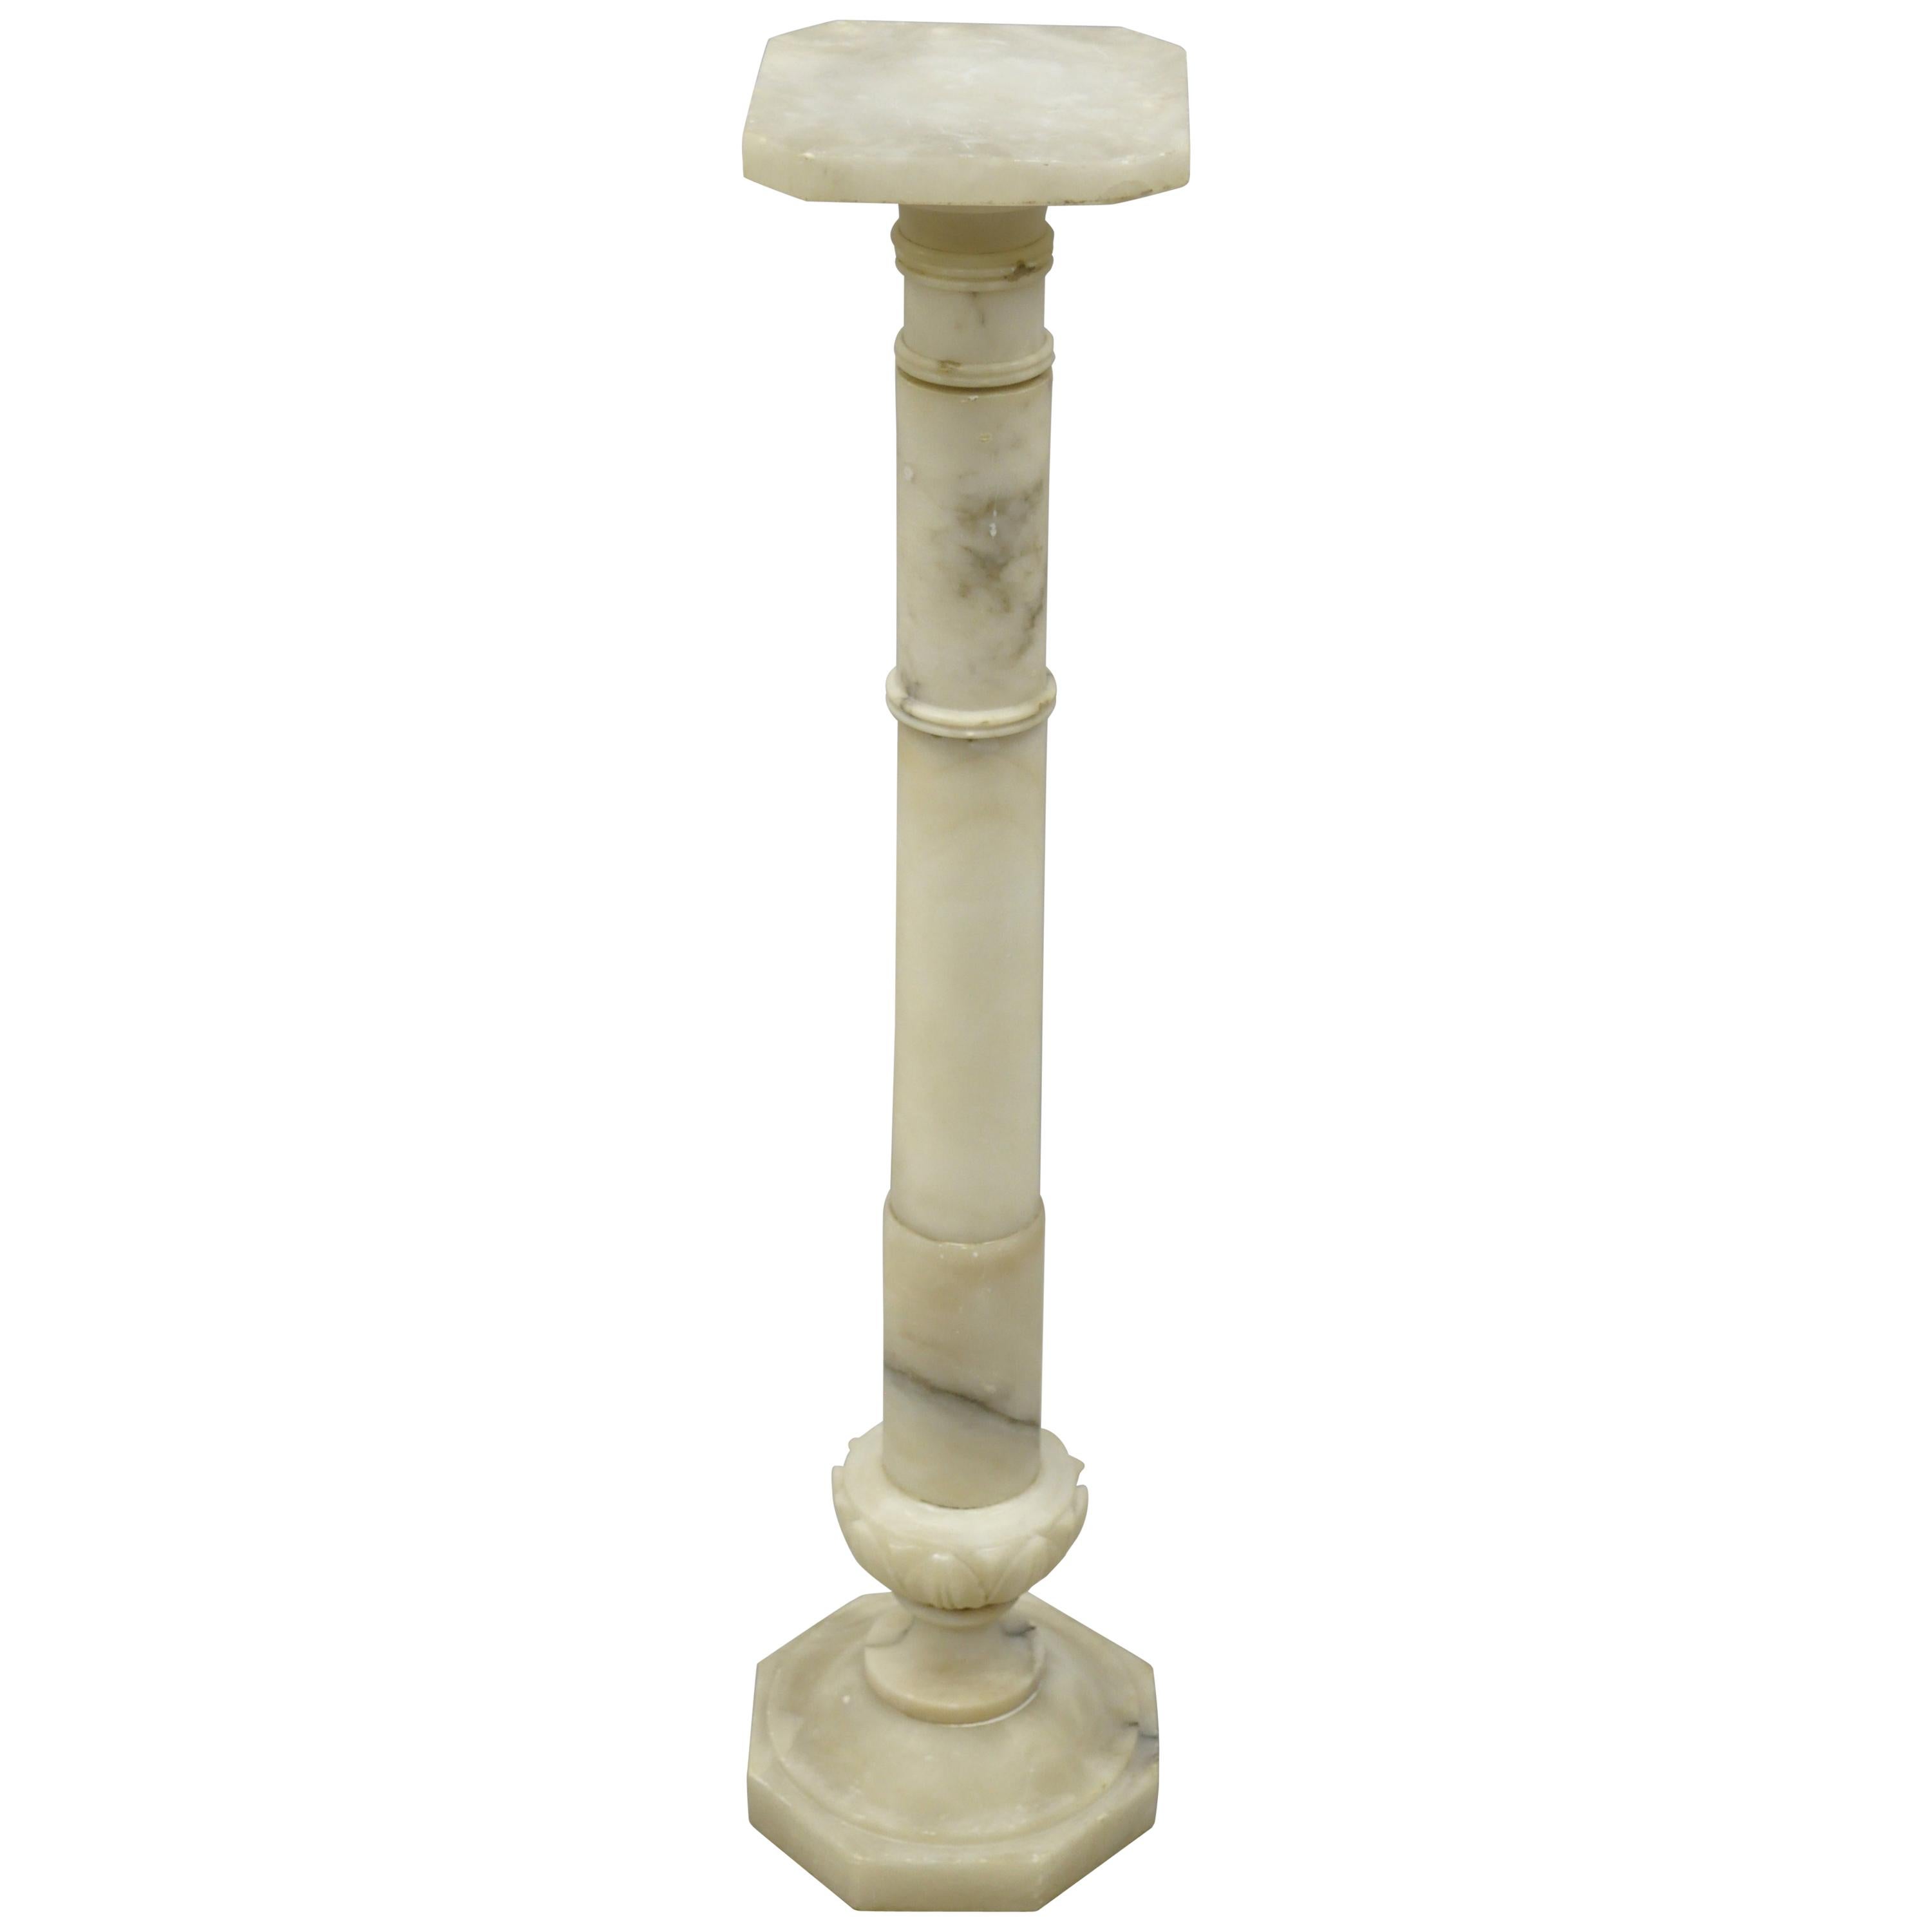 Italian Carved Alabaster Marble Classical Column Statue Pedestal Plant Stand